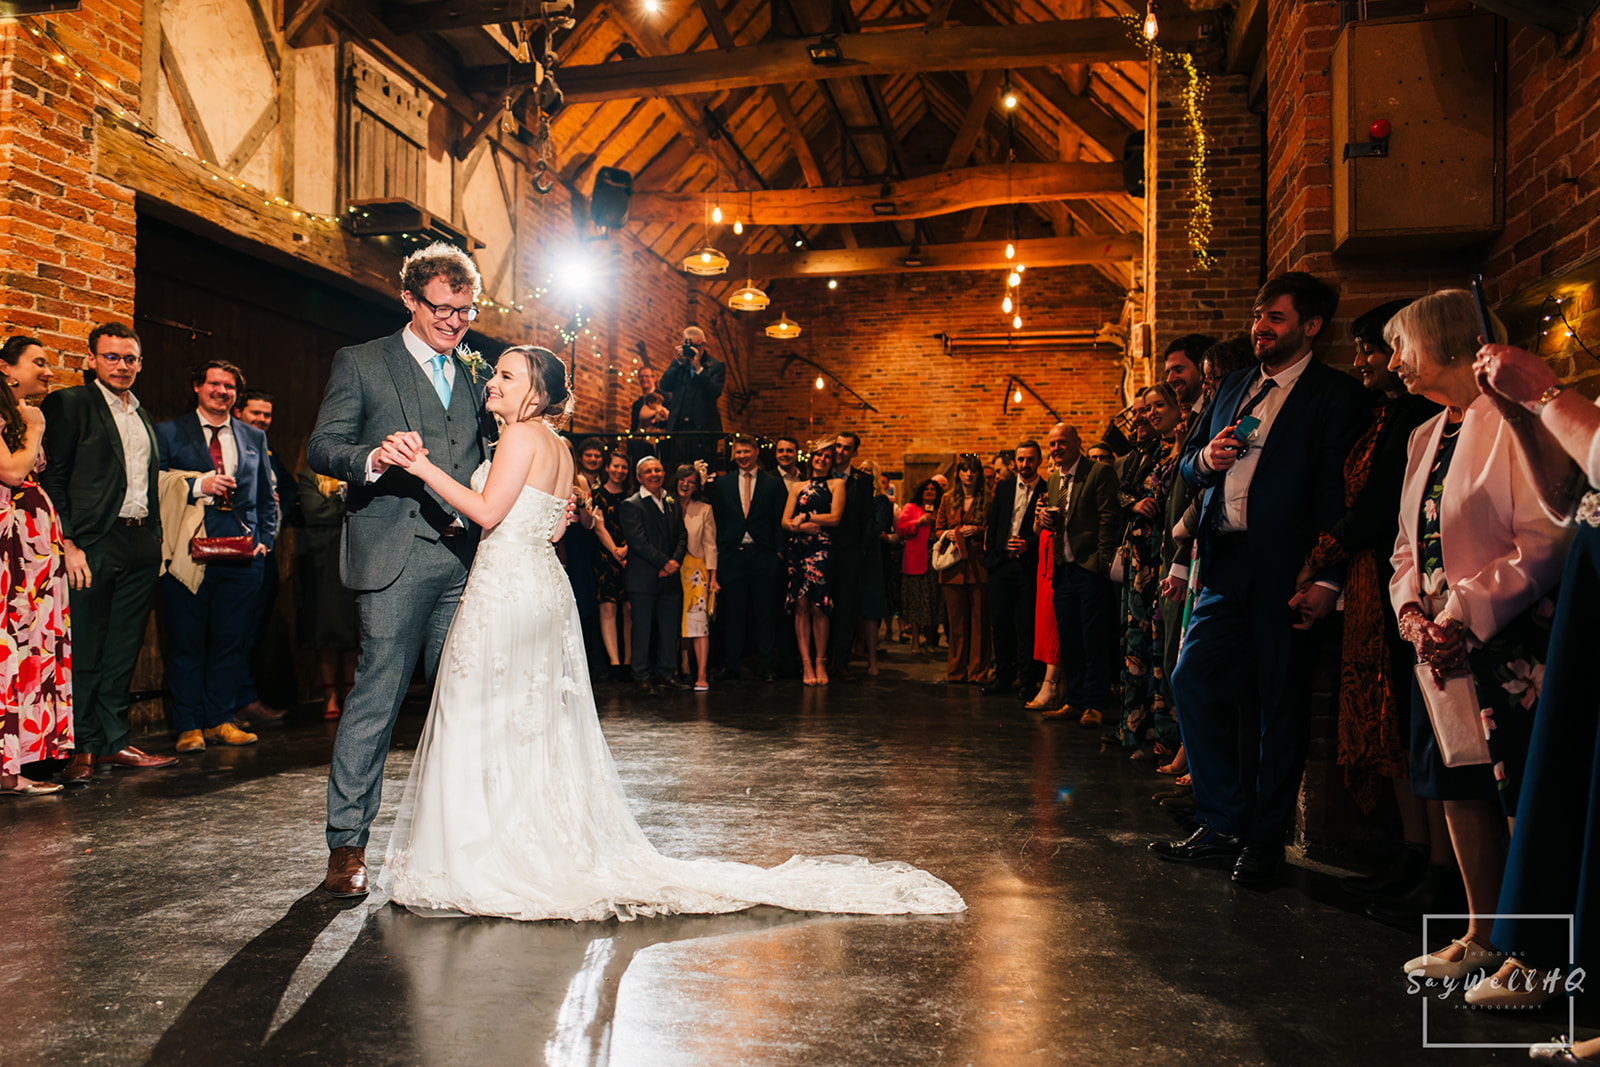 Wedding Photography First dance photos - bride and groom dancing in front of their family and friends
